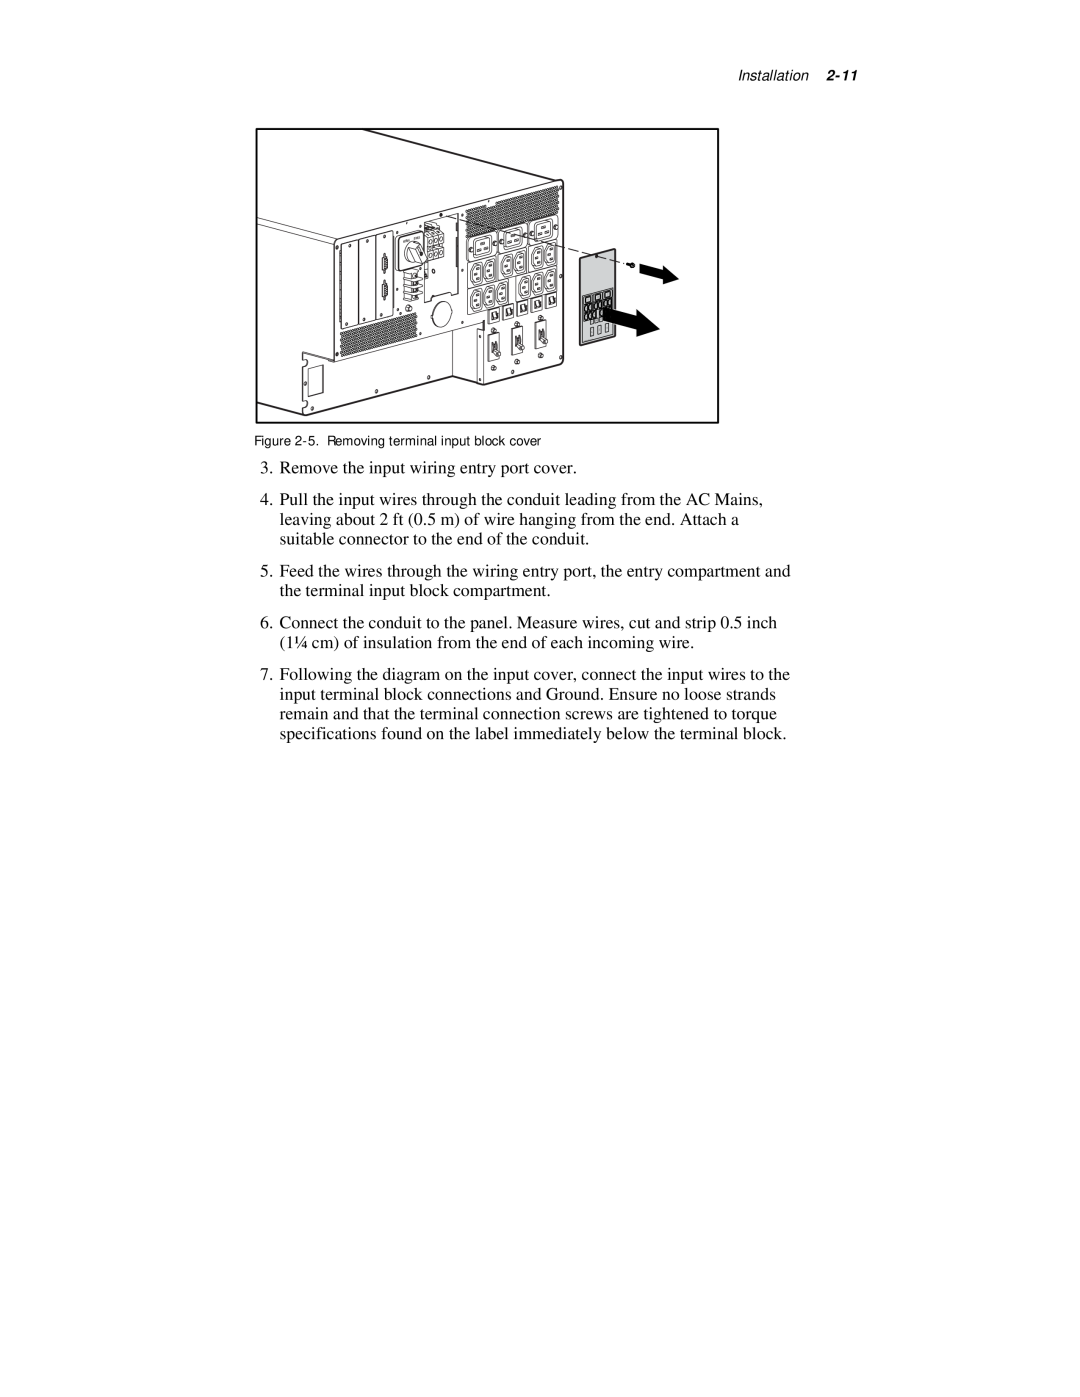 Compaq R6000 Series manual Installation, Remove the input wiring entry port cover 